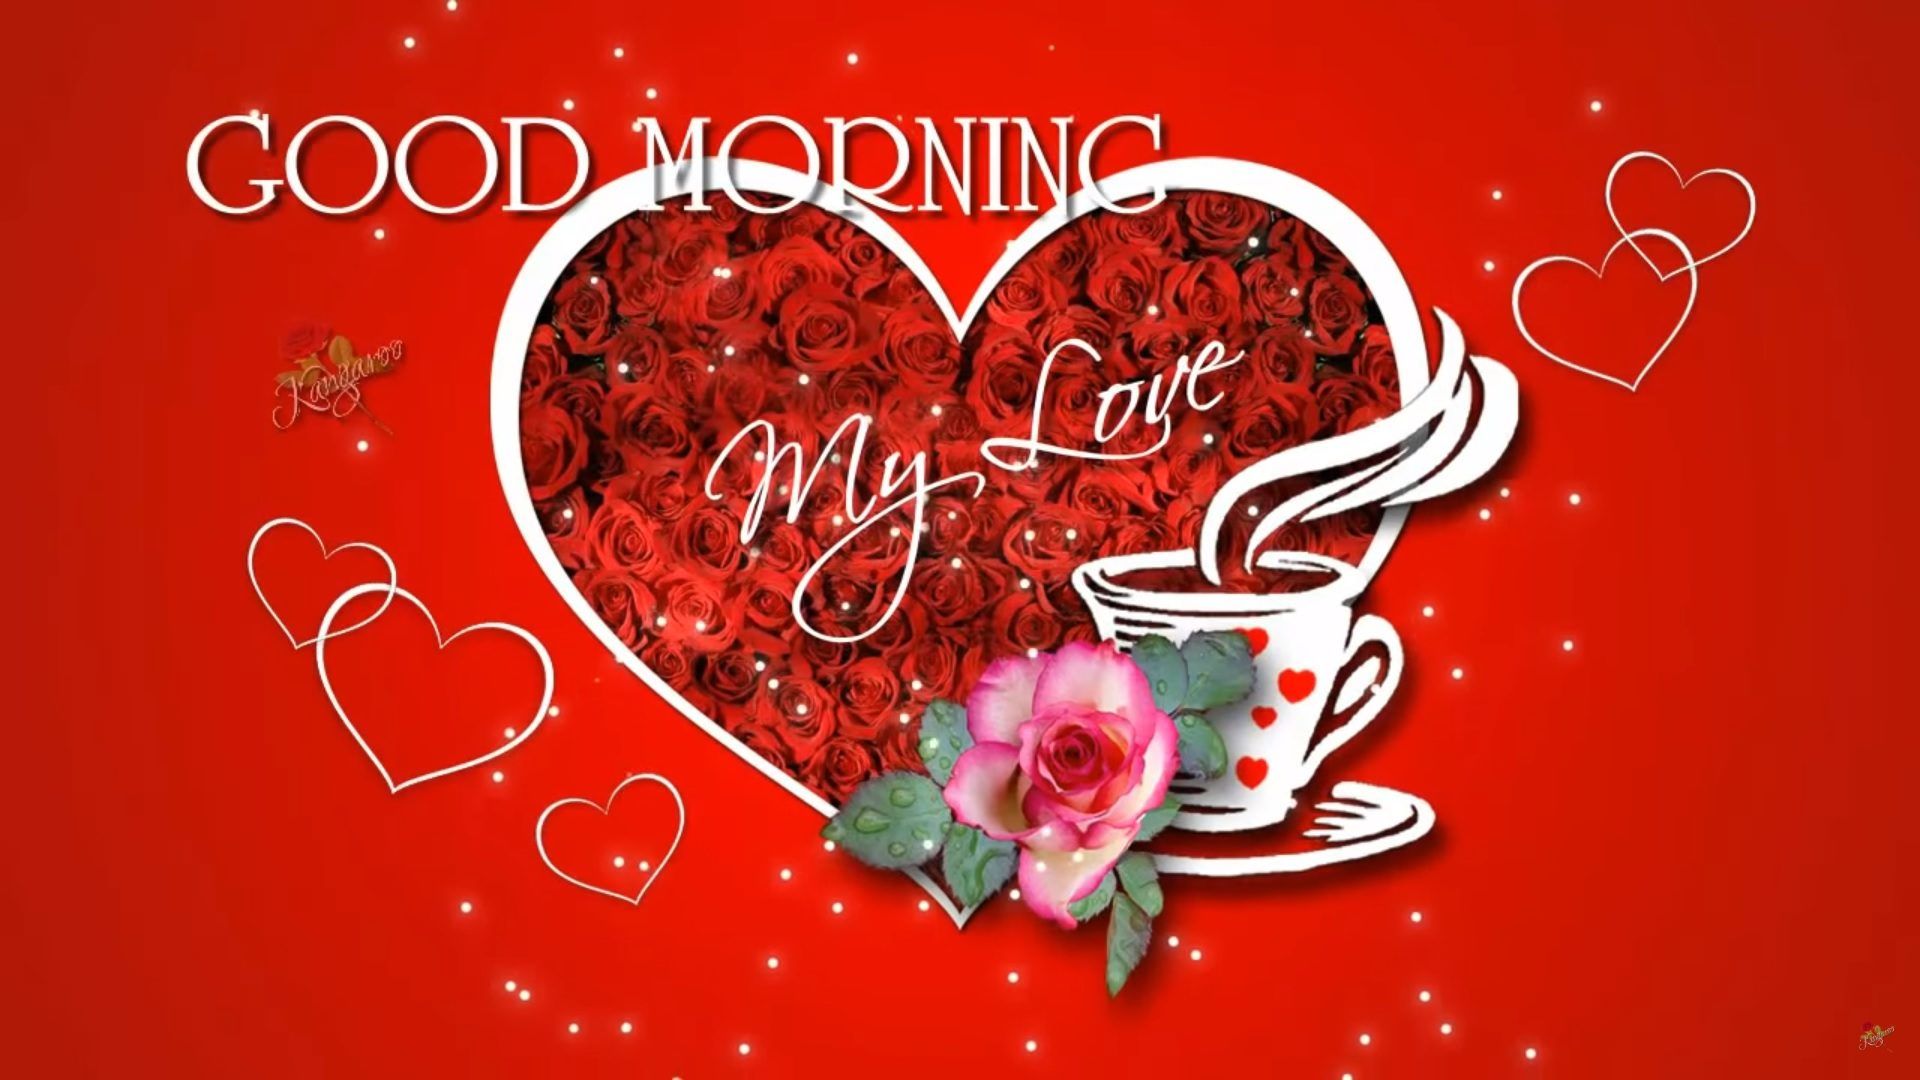 Good Morning My Love Have A Blessed Day HD Wallpaper For Mobile Phones Tablet And Pc, Wallpaper13.com